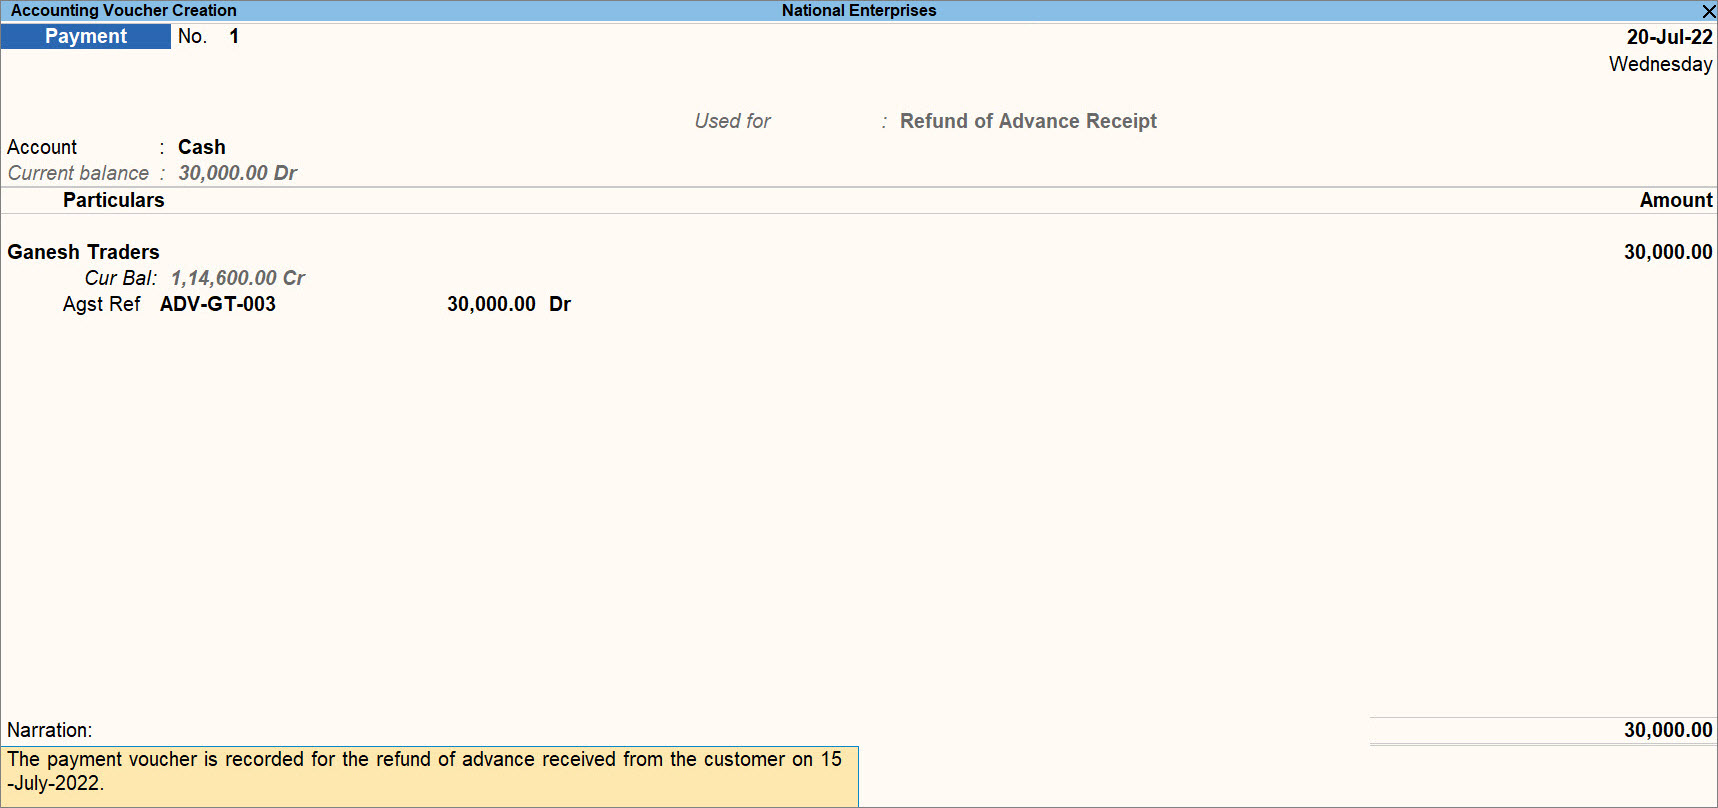 Payment Voucher Recorded for Refund of Advance Received in TallyPrime